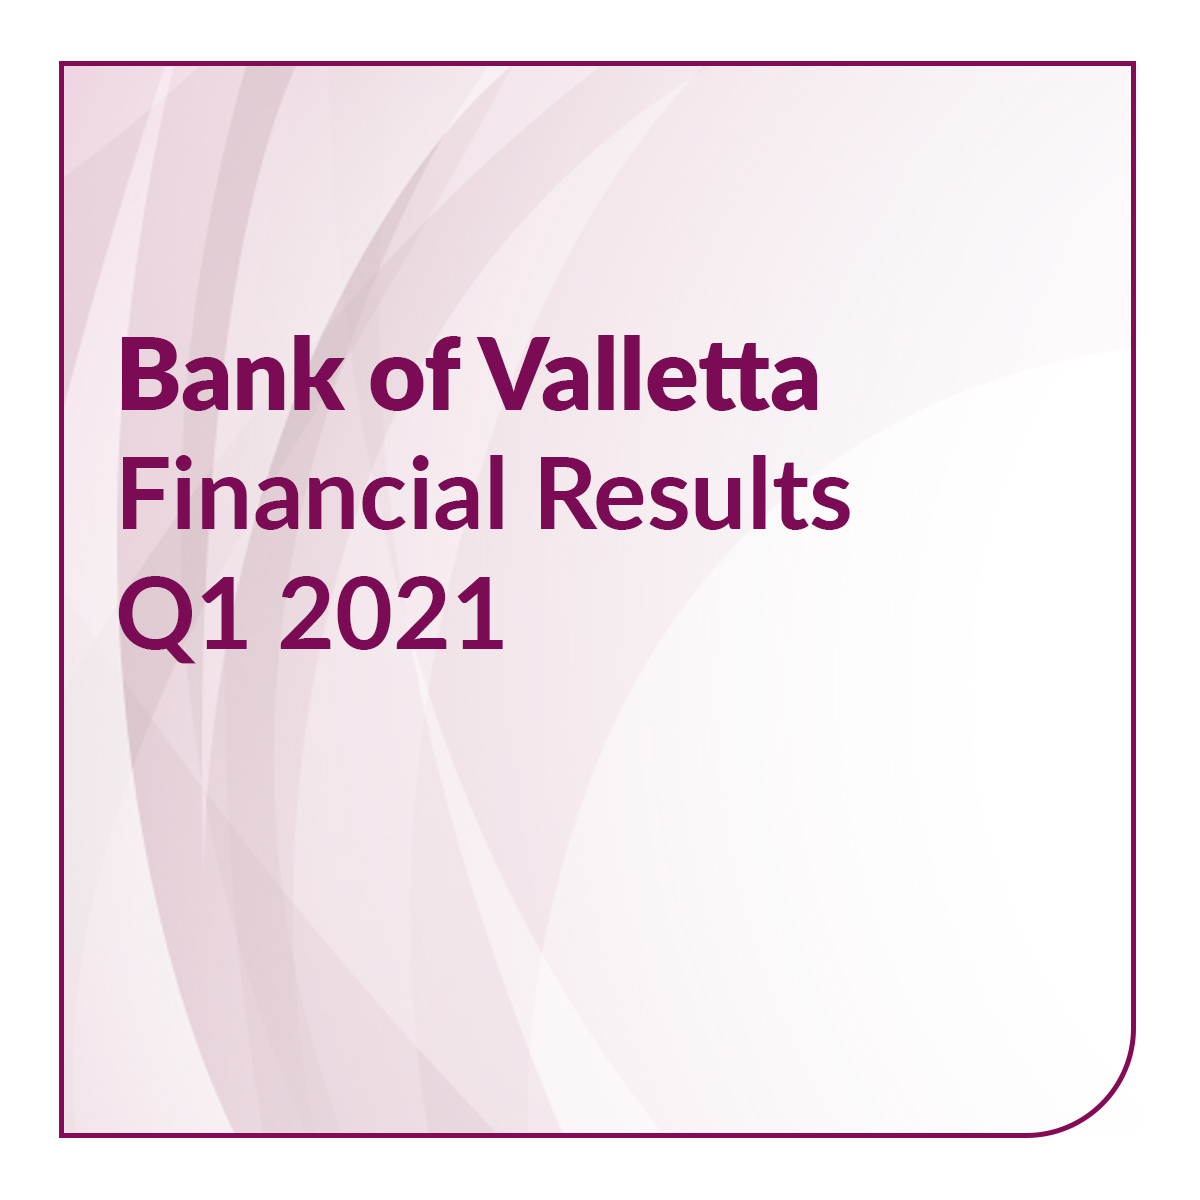 Bank of Valletta announces performance for the first three months of 2021